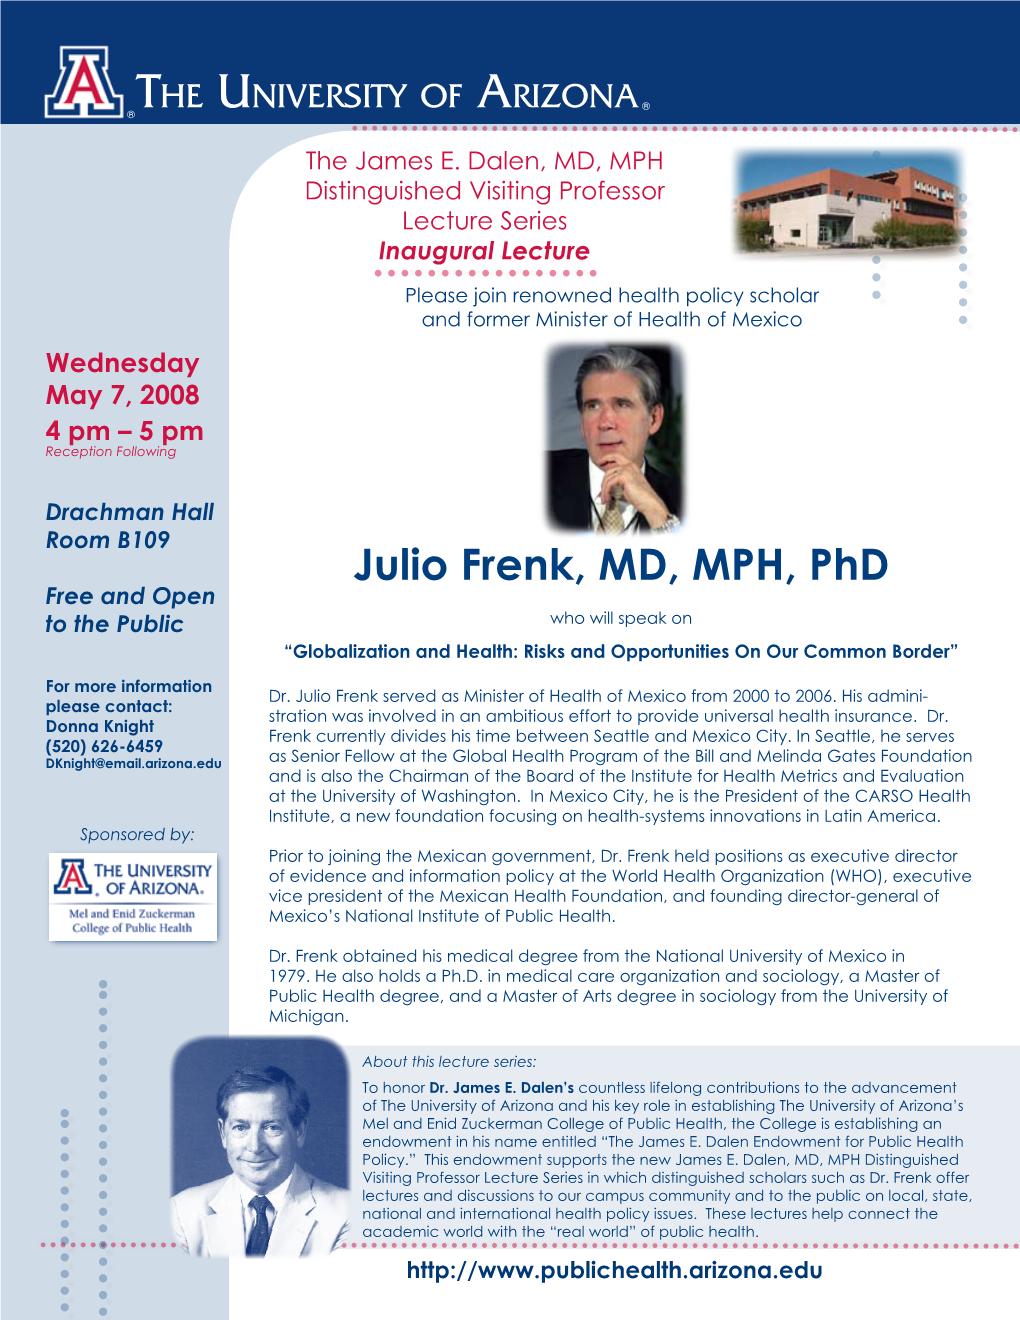 Julio Frenk, MD, MPH, Phd Free and Open to the Public Who Will Speak on “Globalization and Health: Risks and Opportunities on Our Common Border”